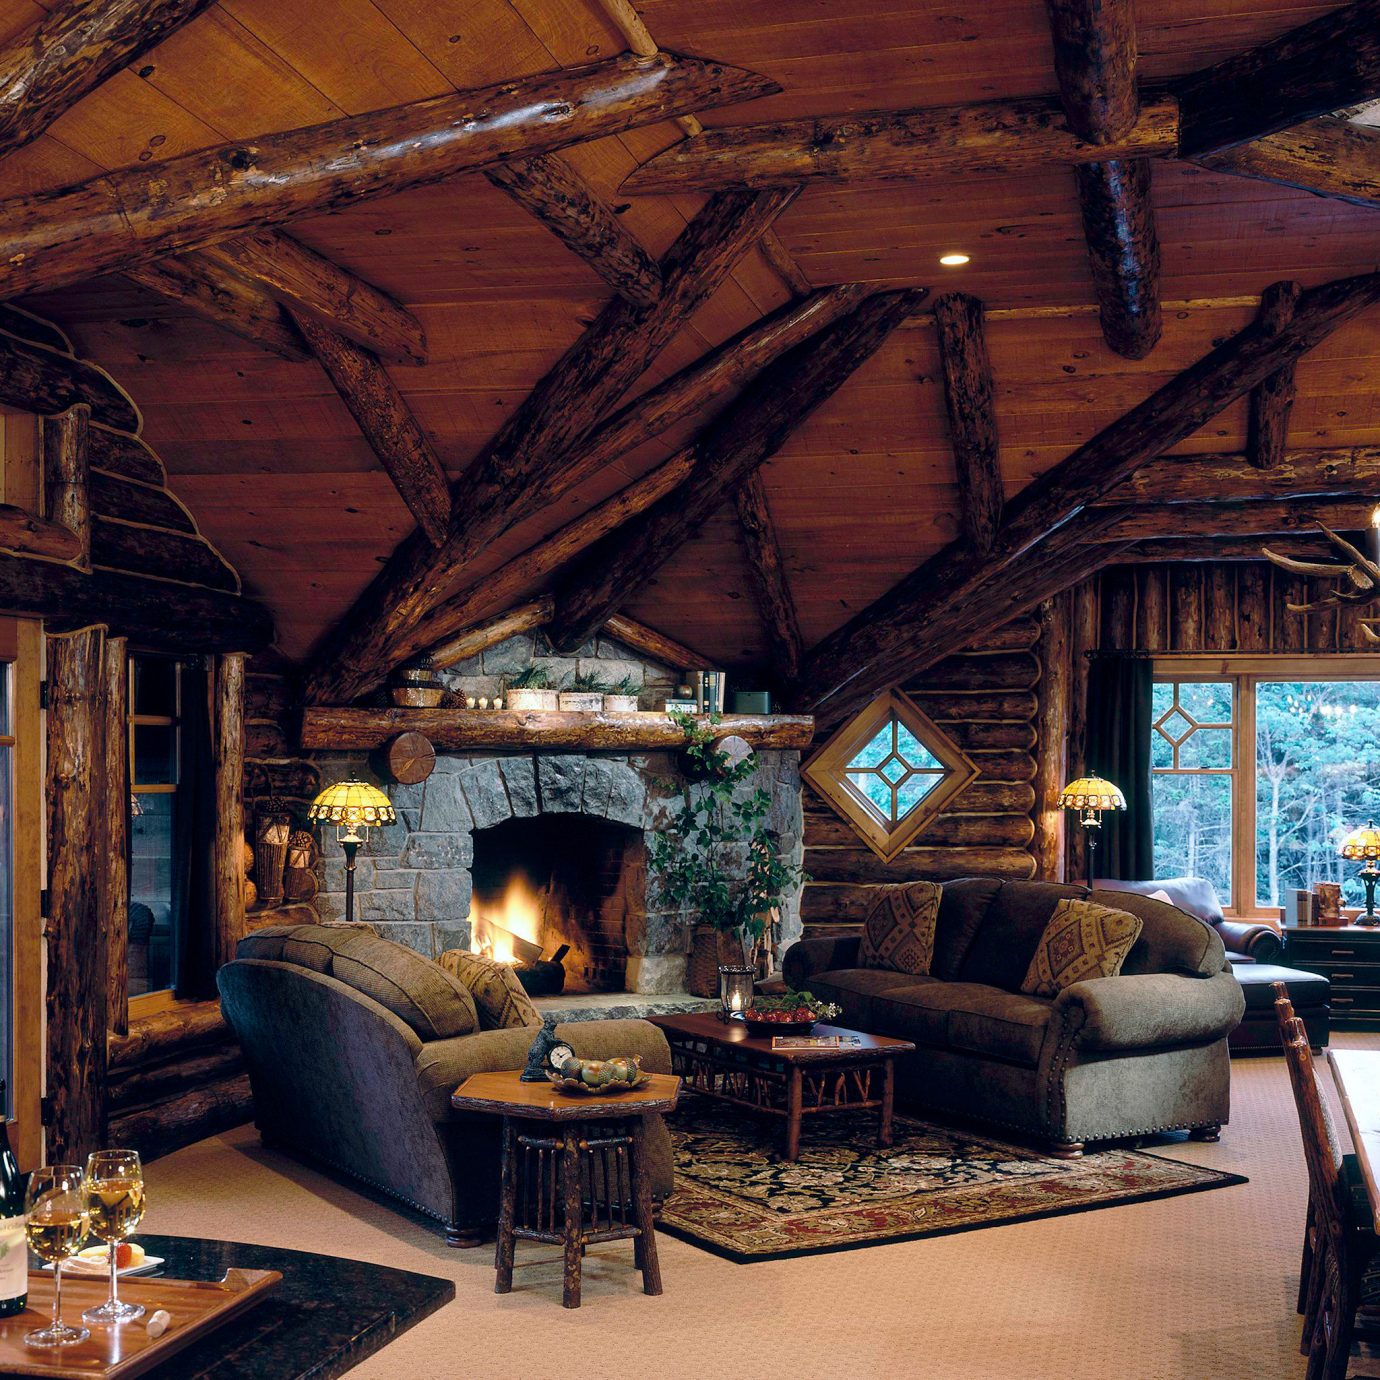 Hotels Lodge Lounge Luxury New York Romantic Romantic Hotels Rustic property building house living room home log cabin cottage outdoor structure